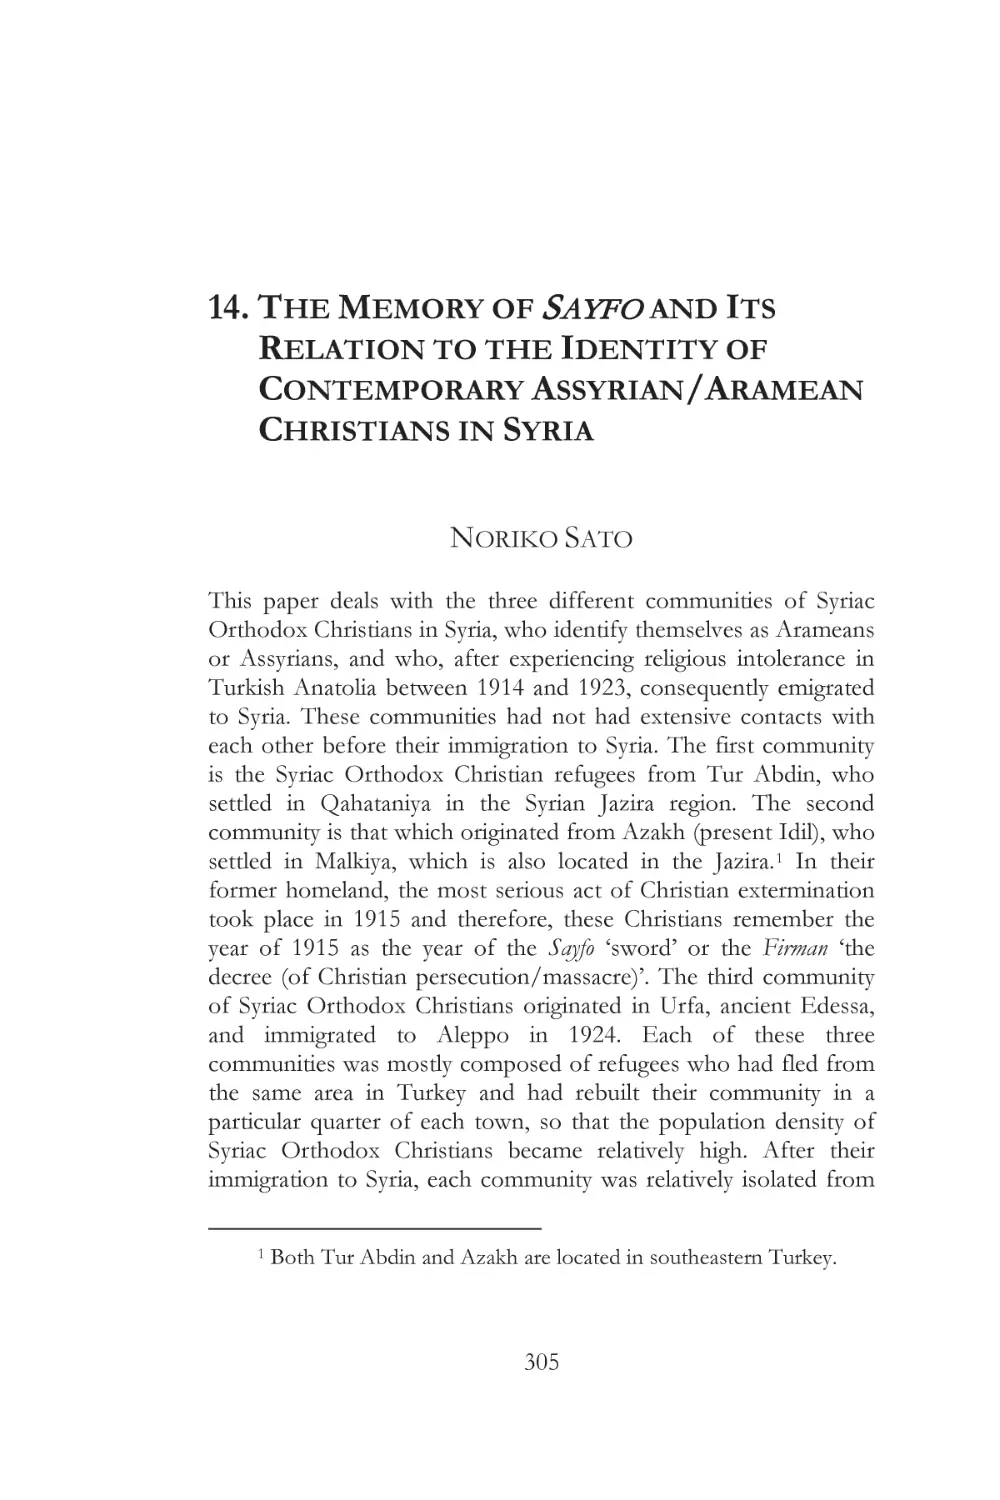 14. THE MEMORY OF SAYFO AND ITS RELATION TO THE IDENTITY OF CONTEMPORARY ASSYRIAN/ARAMEAN CHRISTIANS IN SYRIA